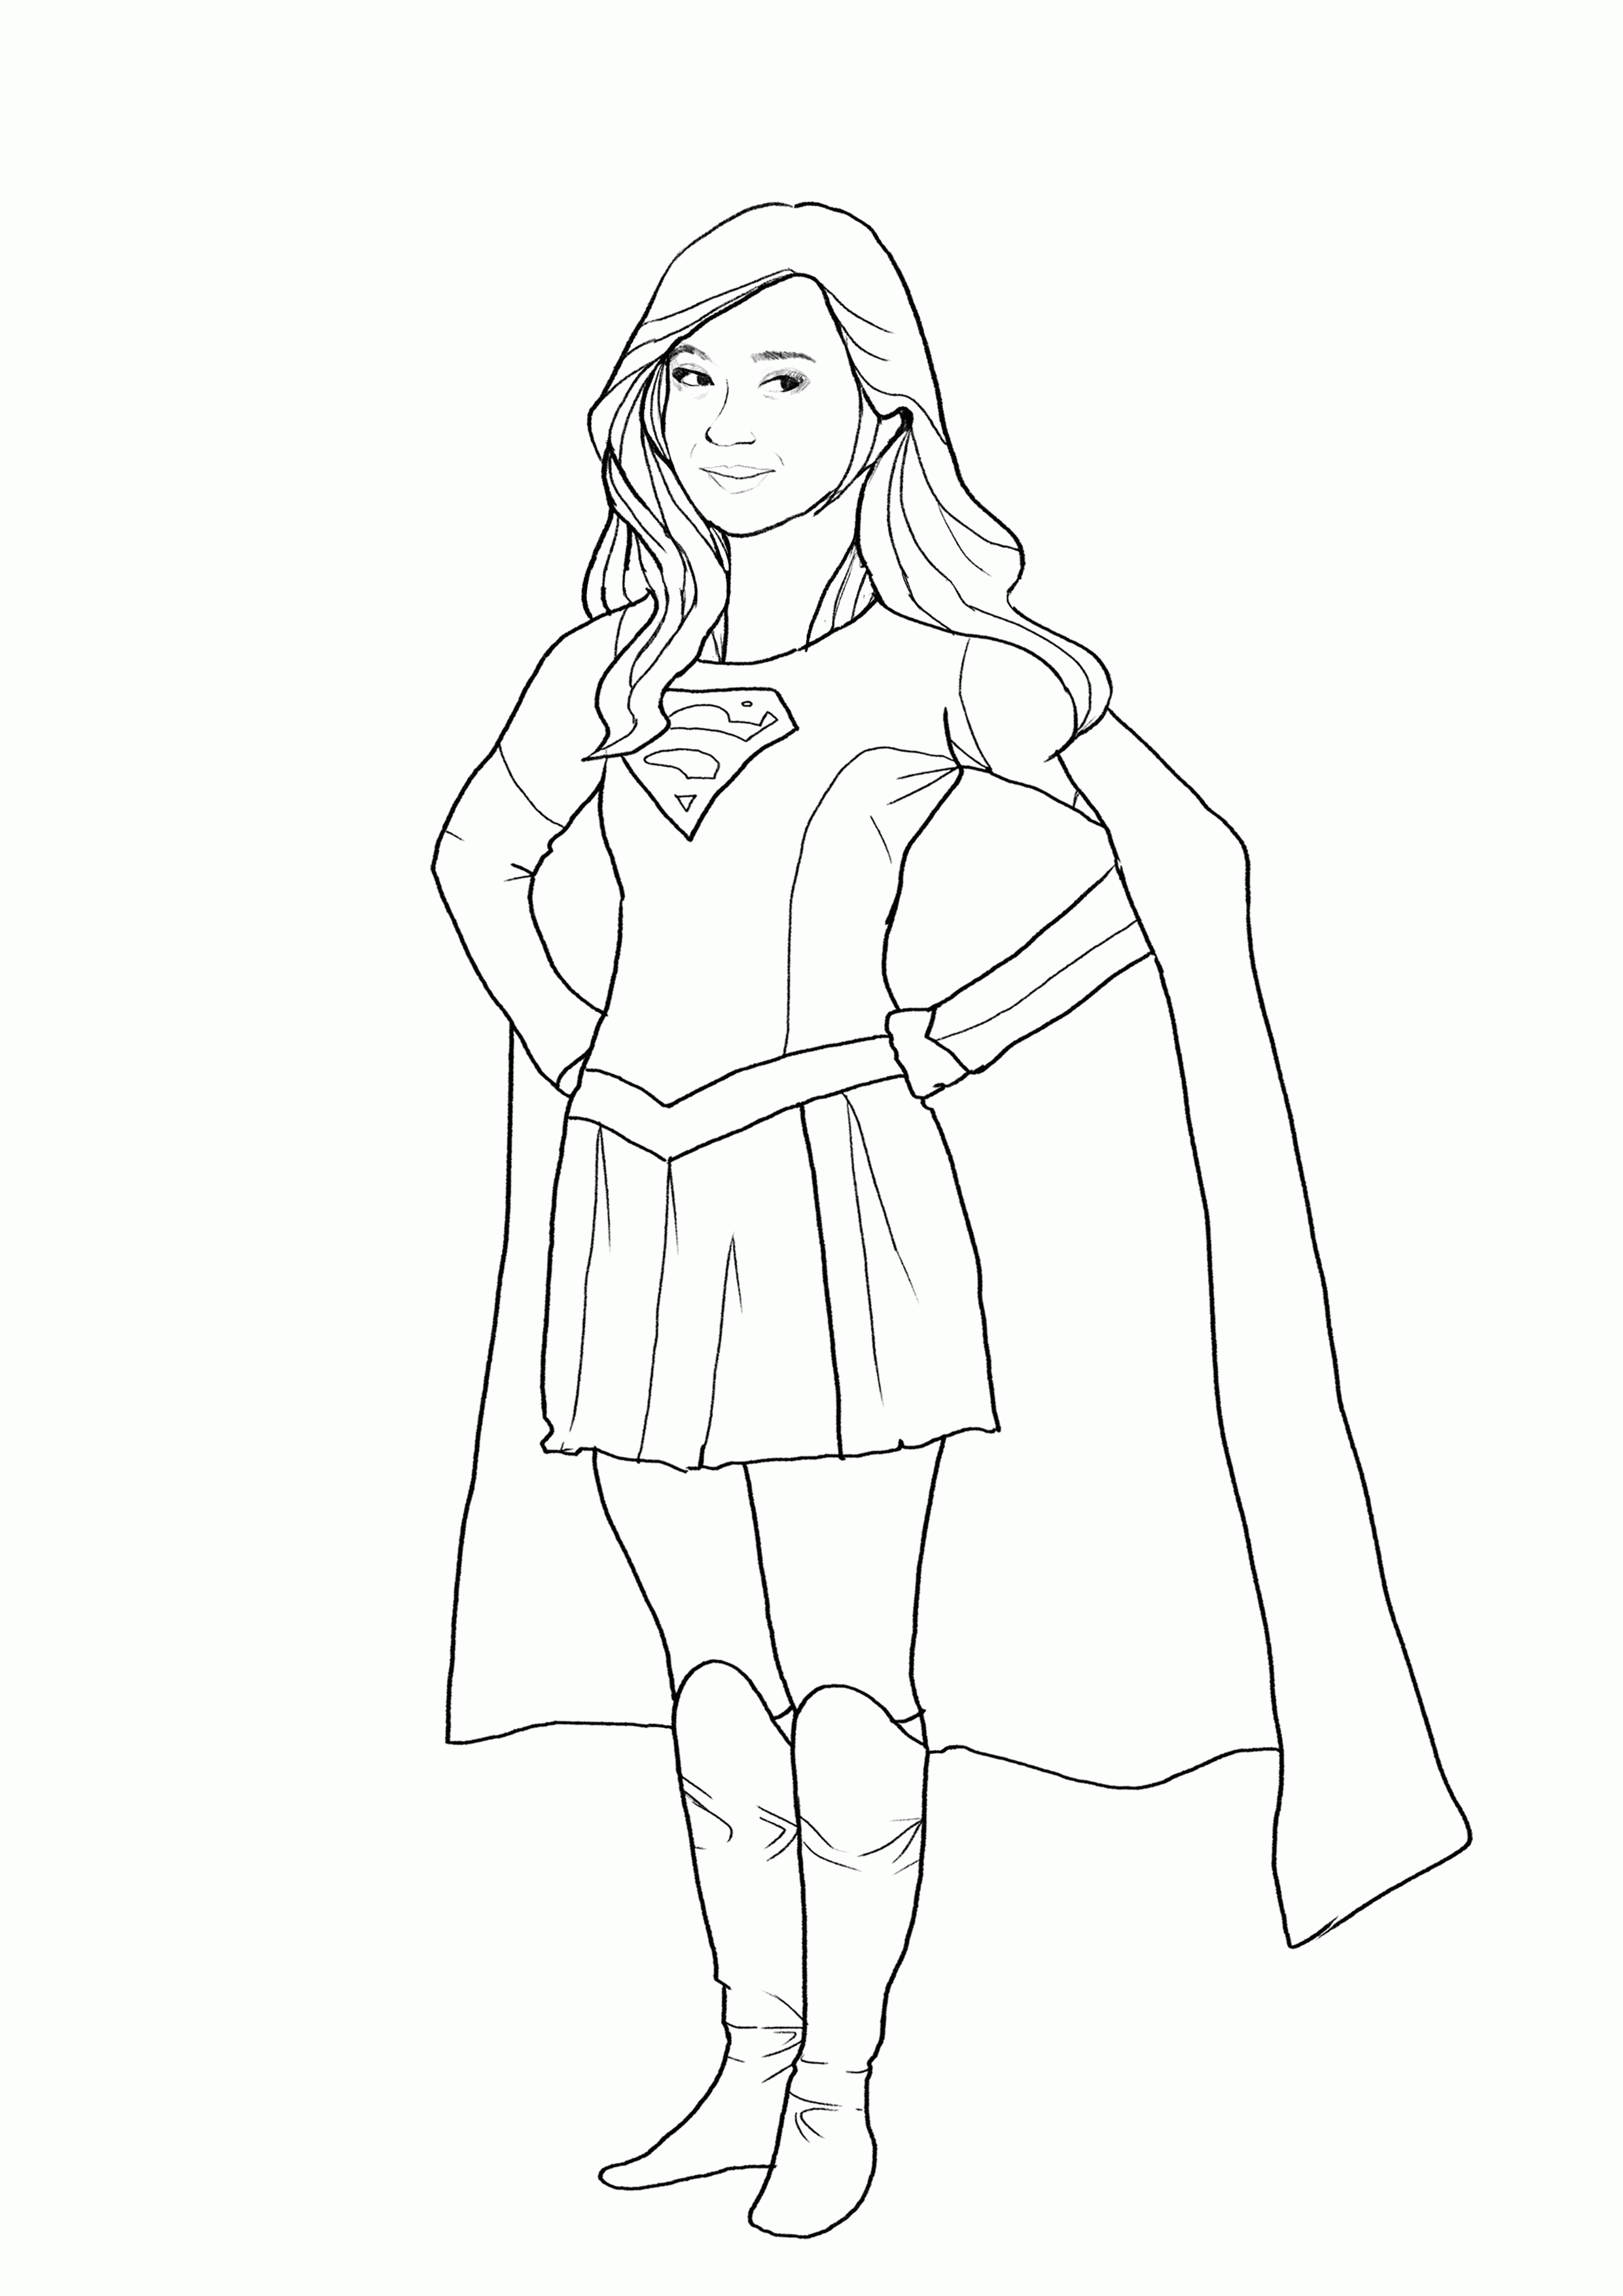 supergirl-coloring-pages-best-coloring-pages-for-kids